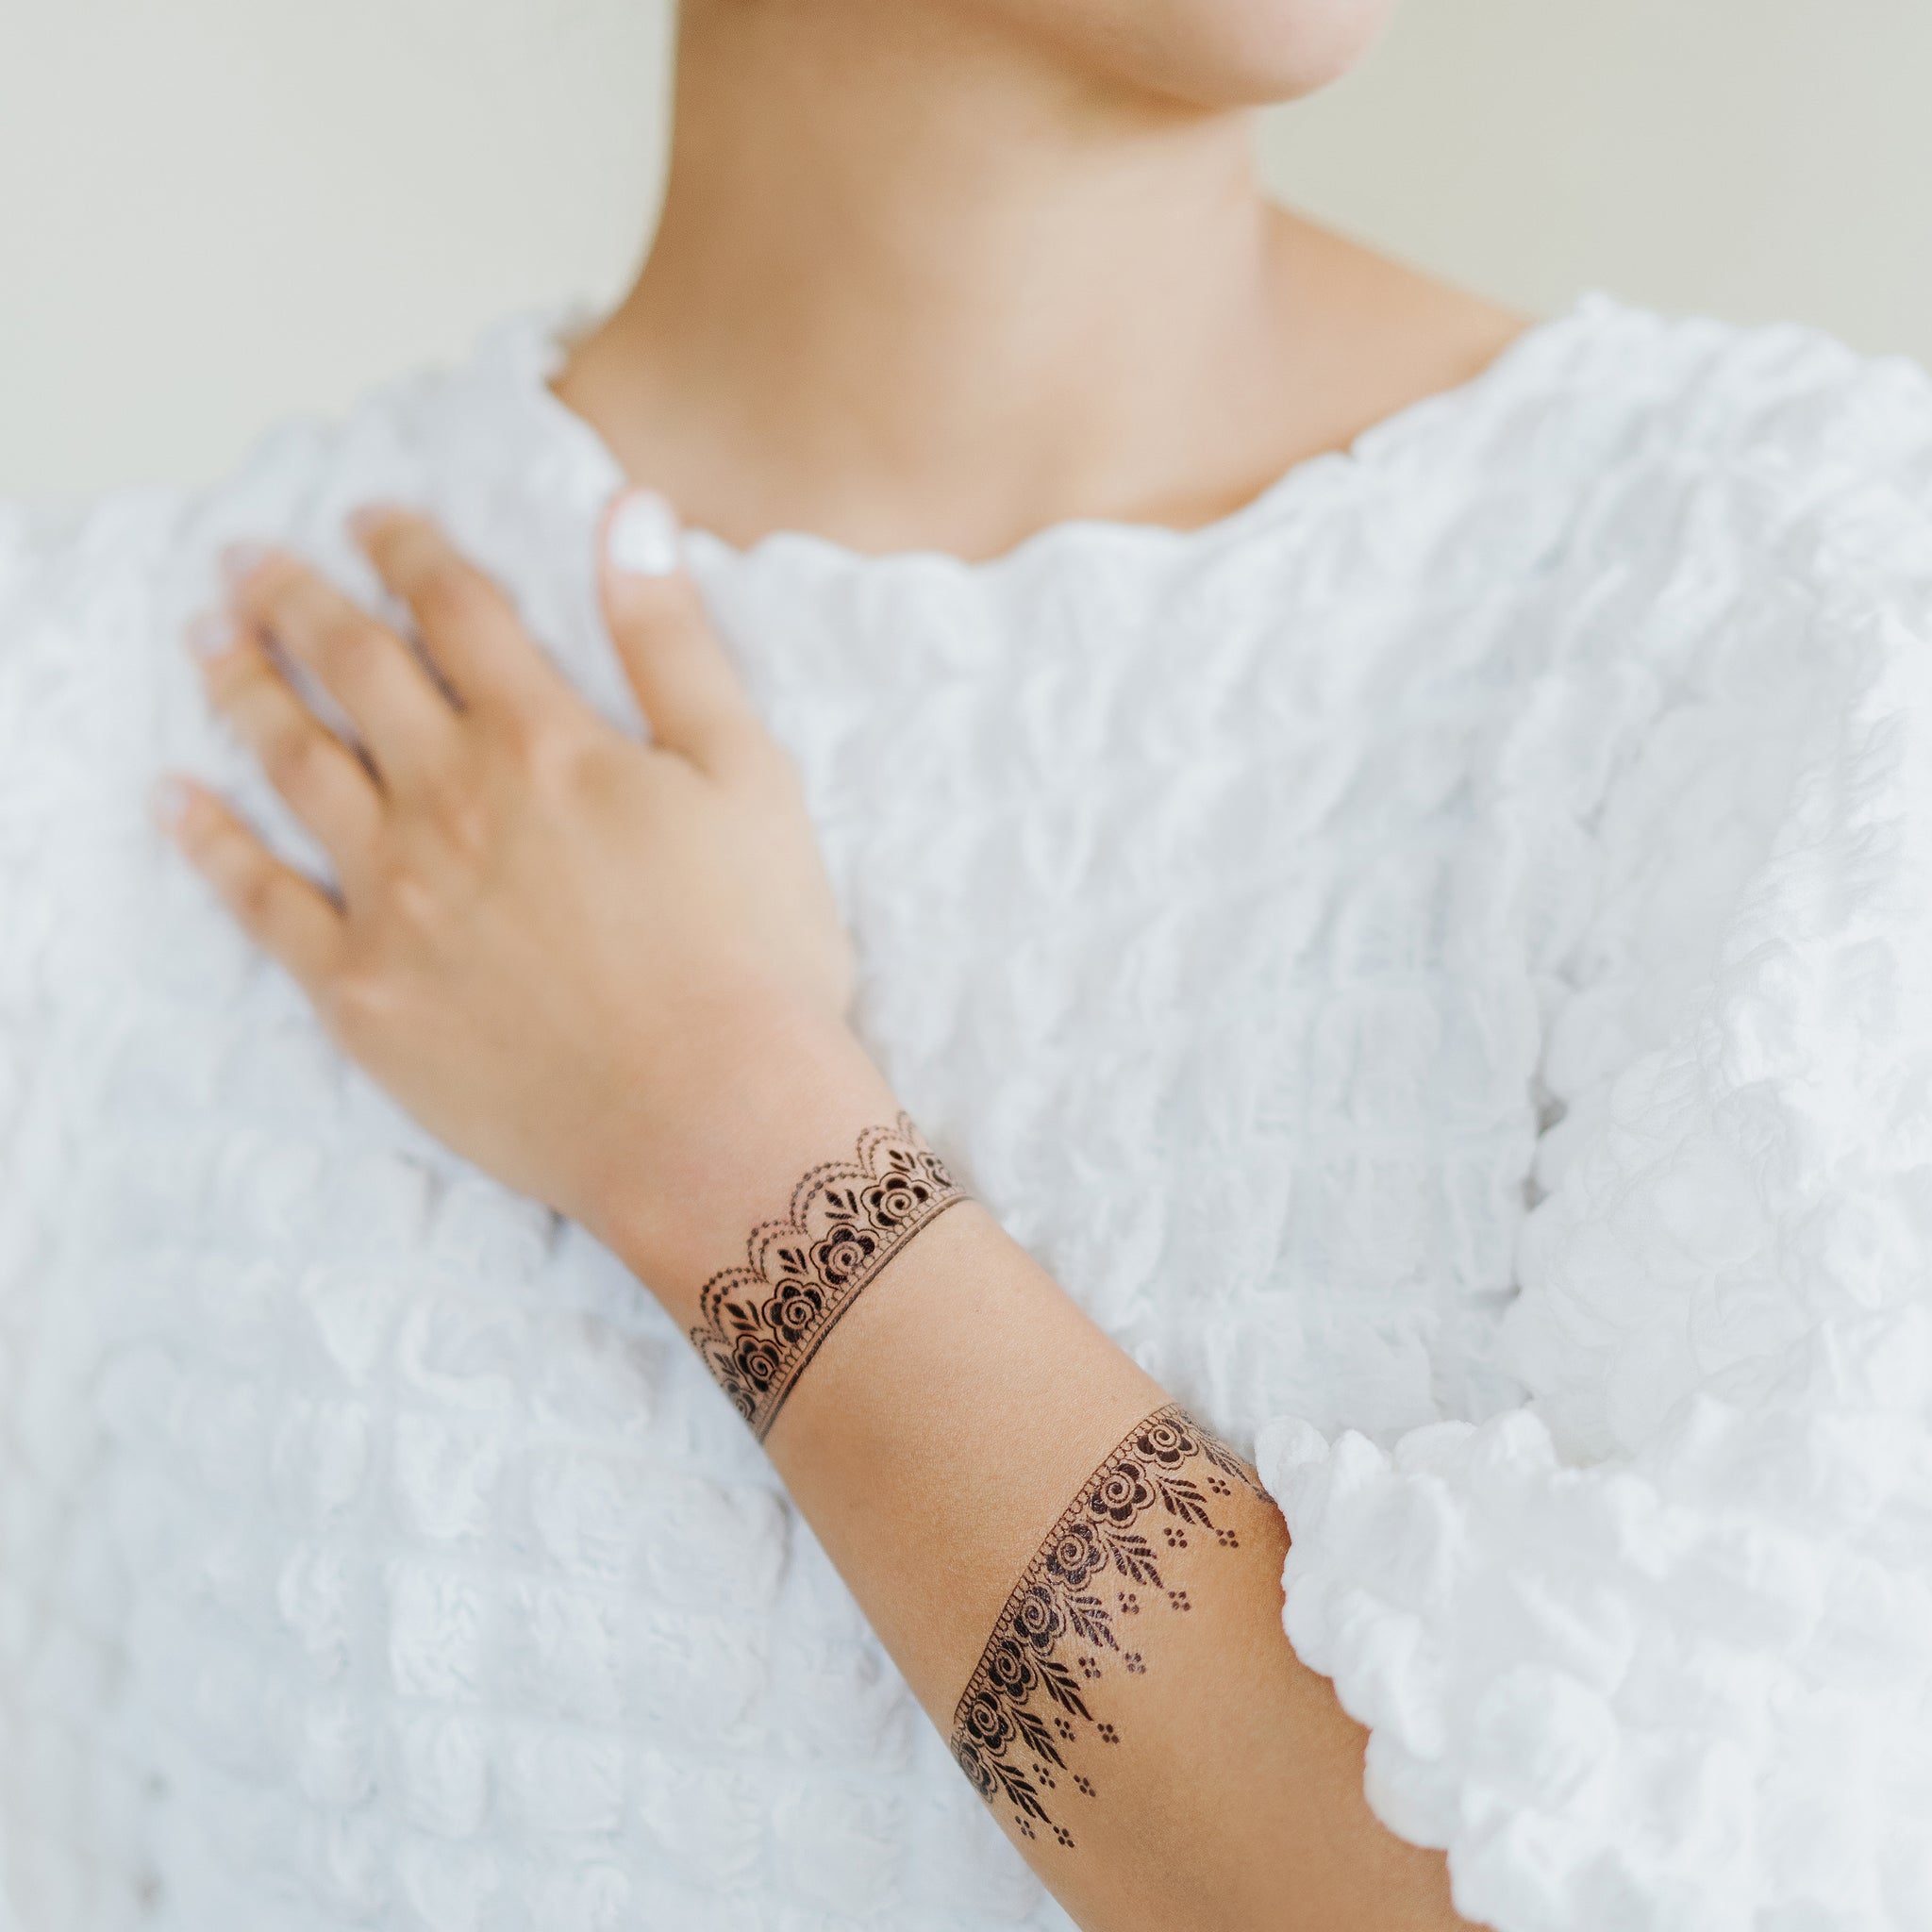 You Can Experience wrist tattoo Using These Helpful Tips #wristtattoo | Cuff  tattoo, Wrist tattoo cover up, Flower wrist tattoos